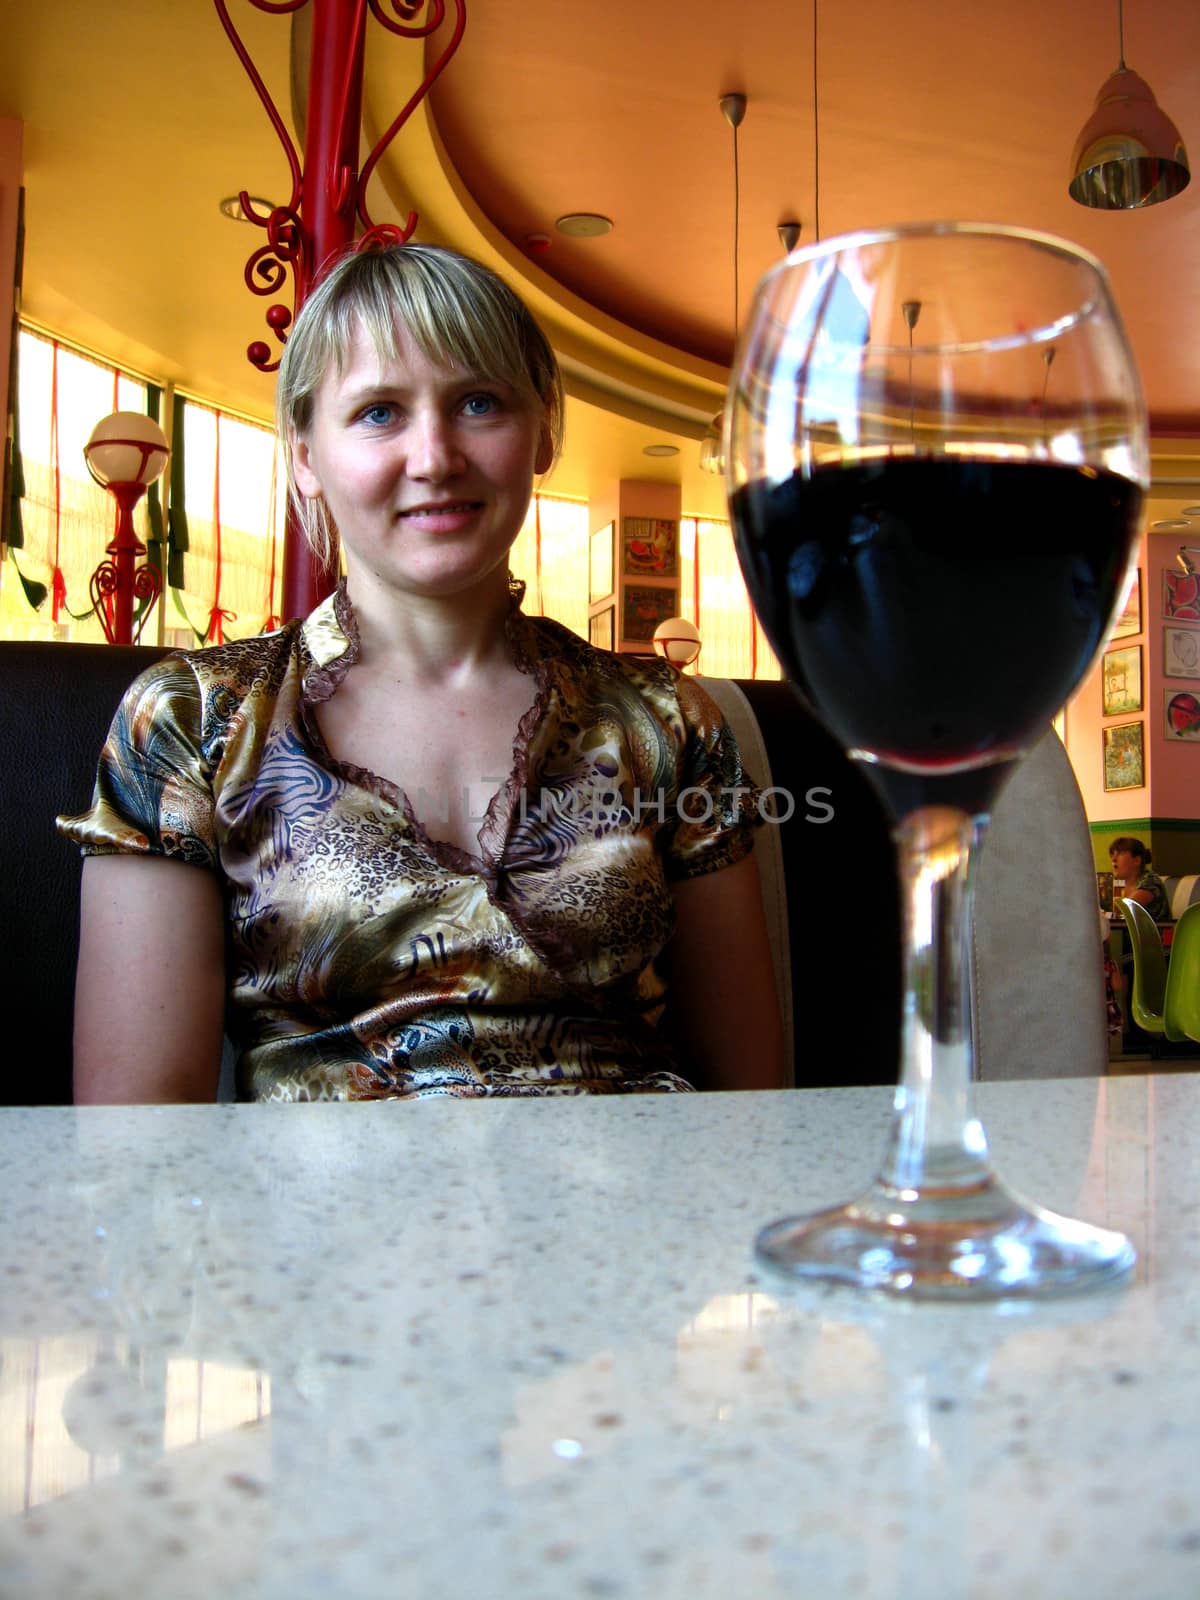 the girl with glass of red wine in restaurant